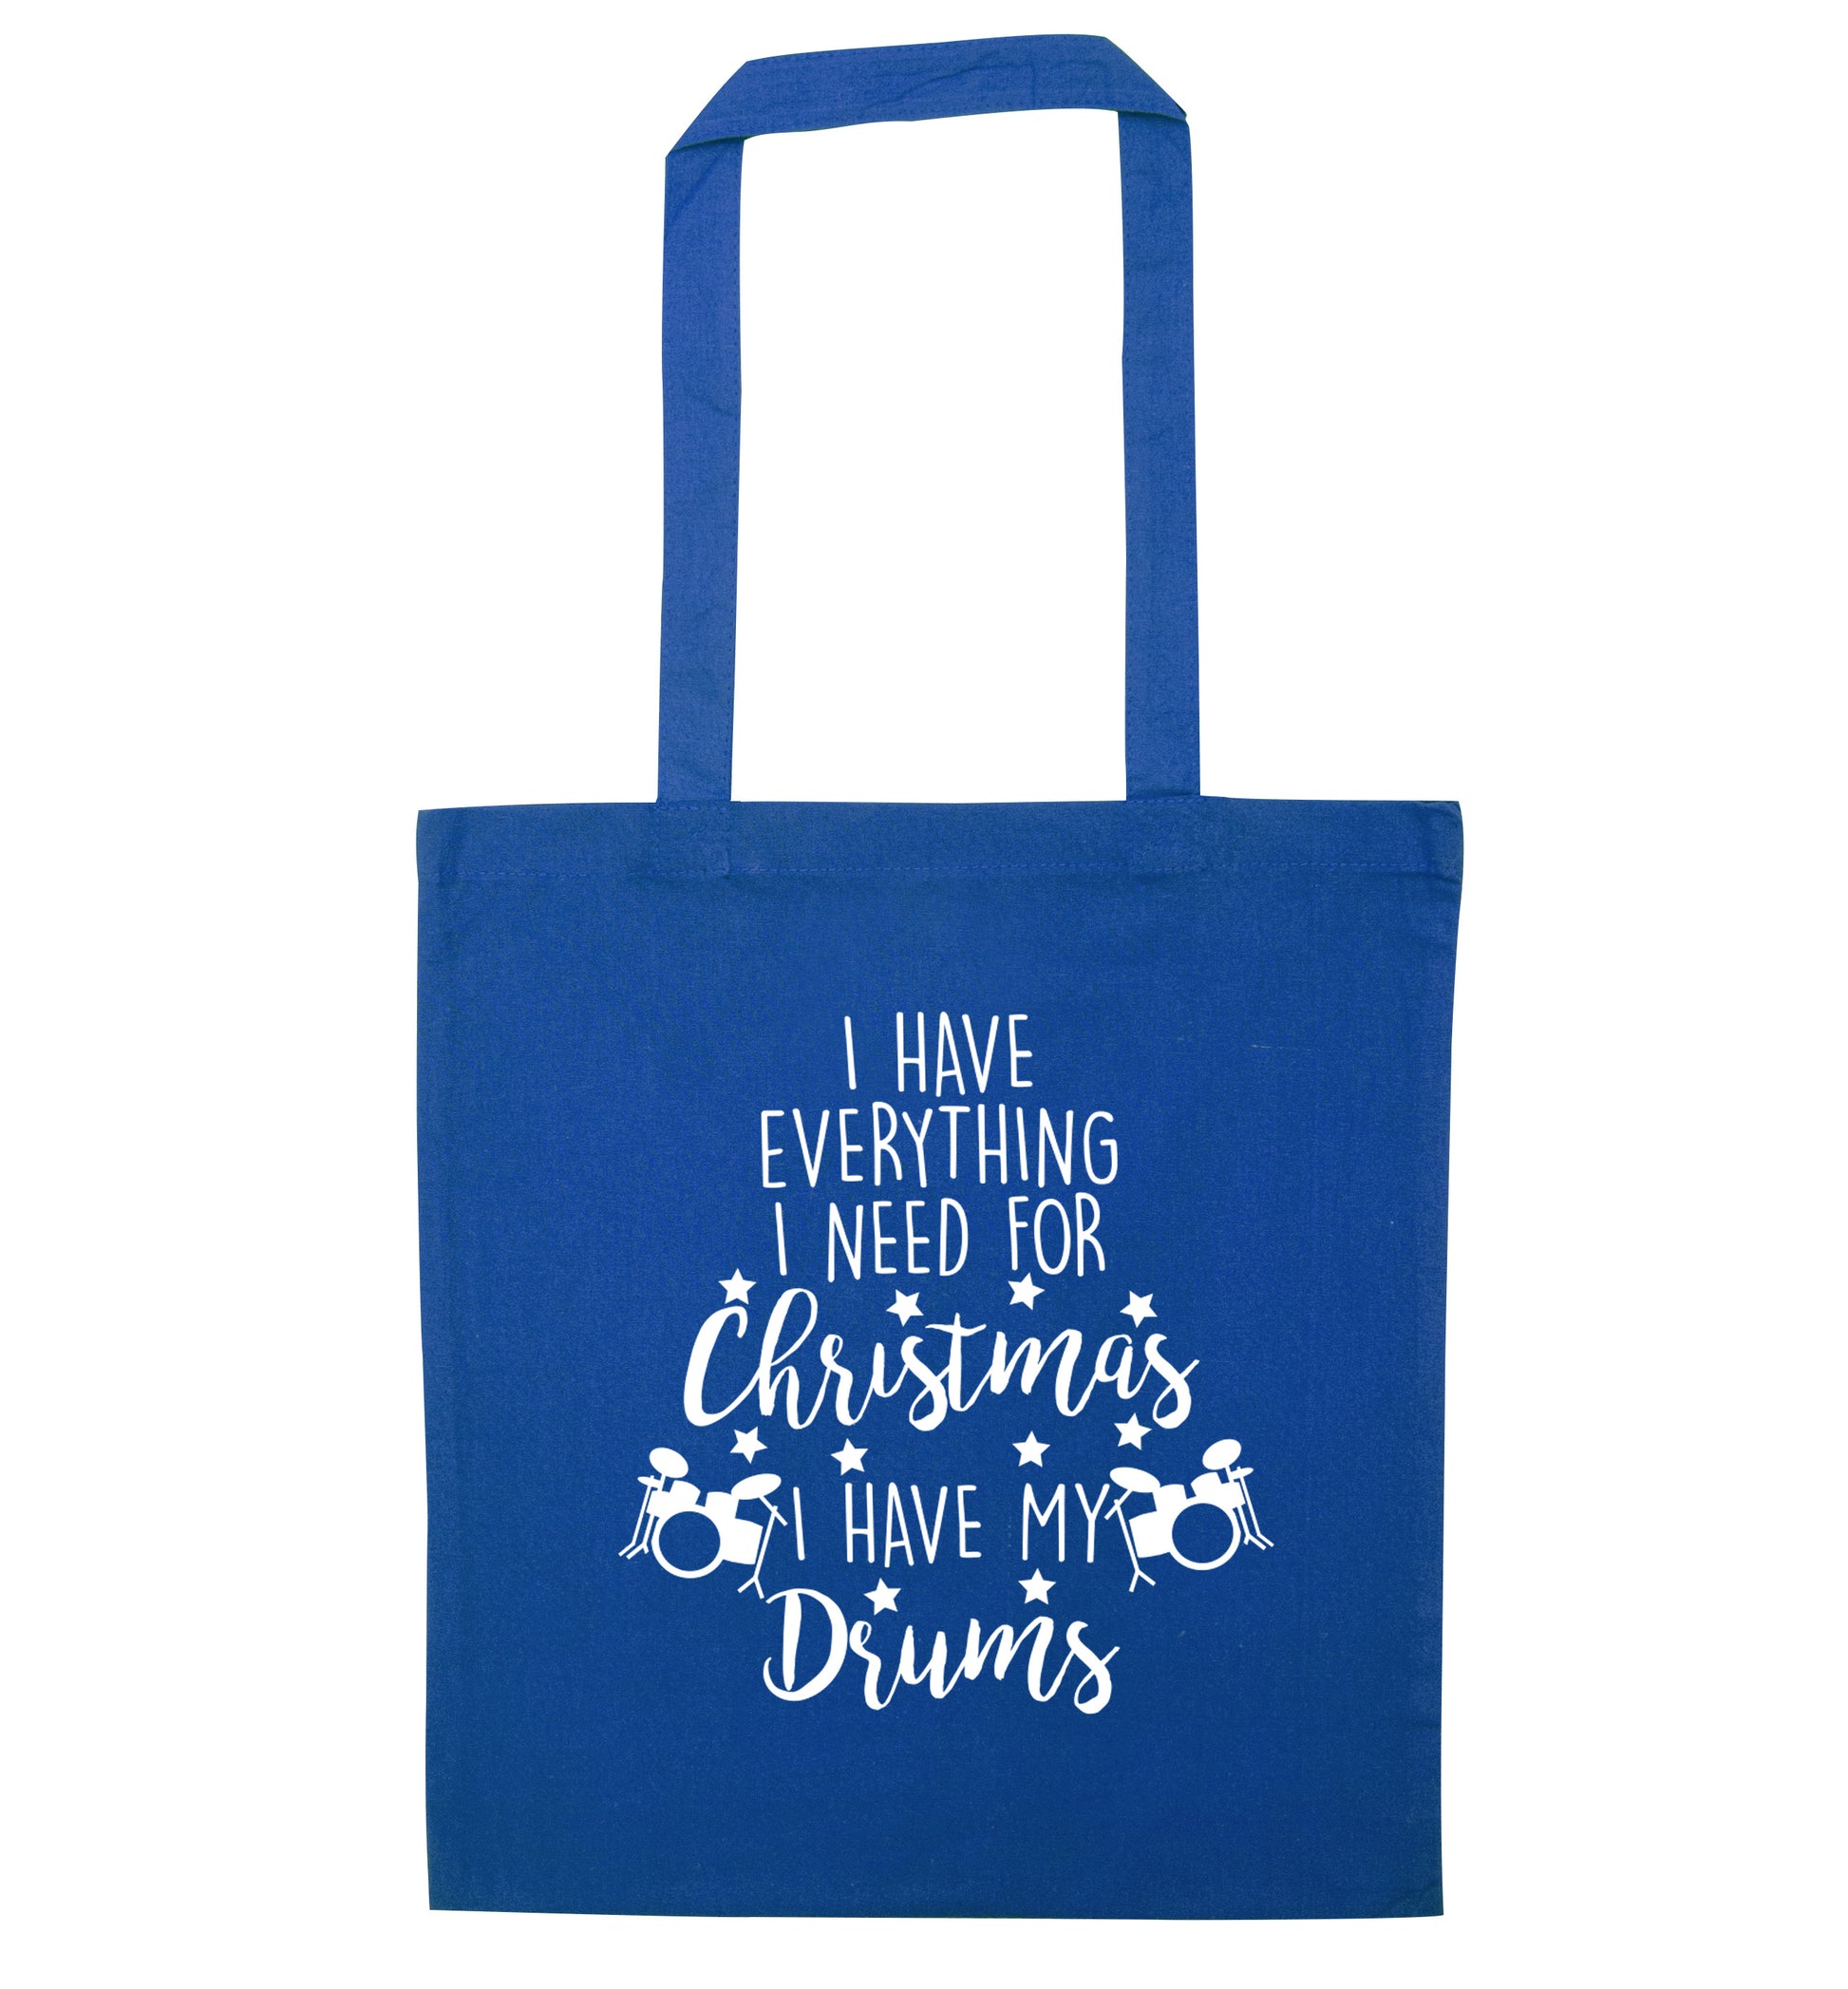 I have everything I need for Christmas I have my drums! blue tote bag